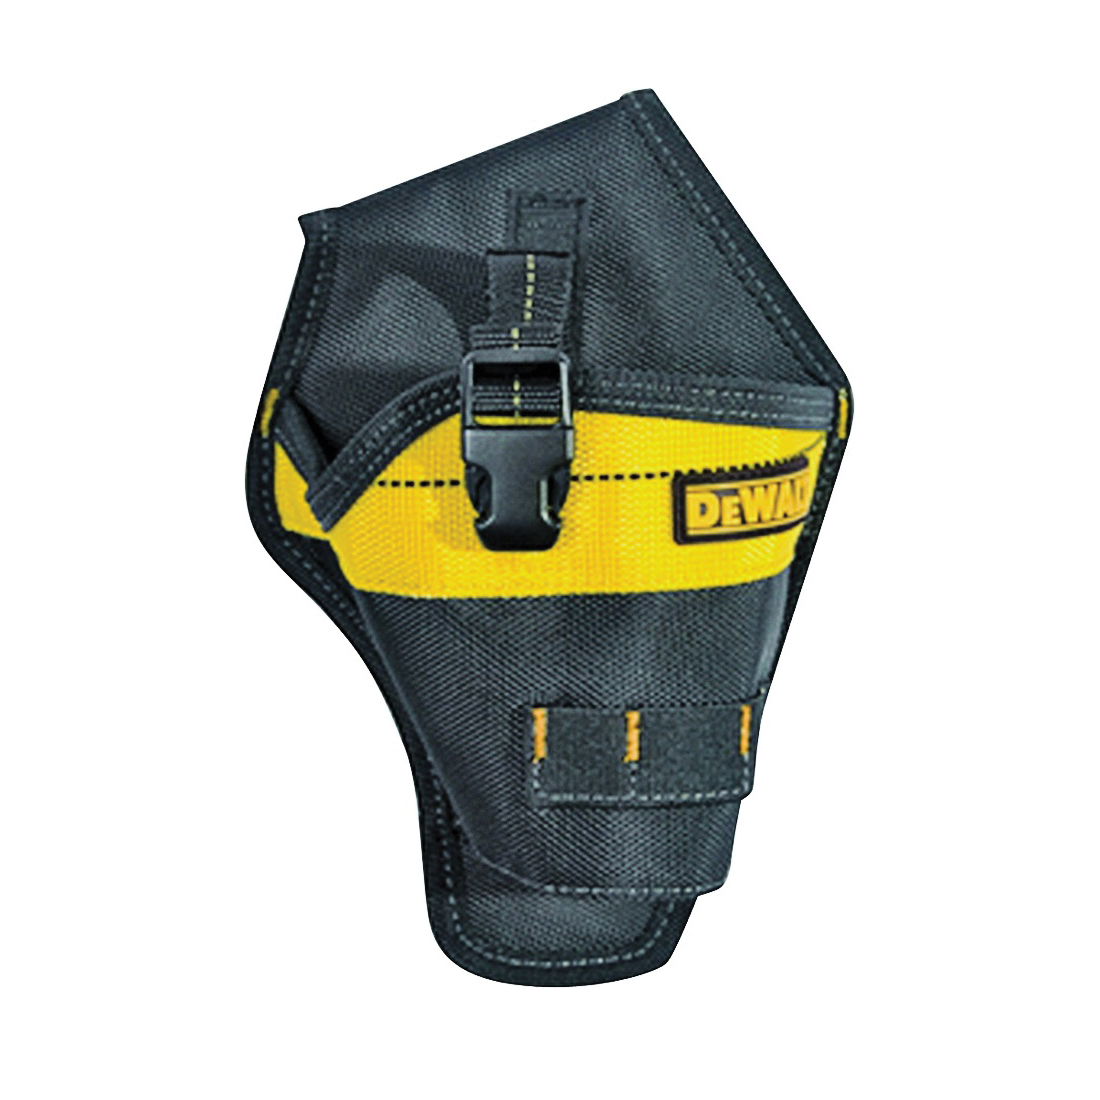 DG5121 Impact Driver Holster, Ballistic Poly Fabric, 12-1/2 in W, 7 in H